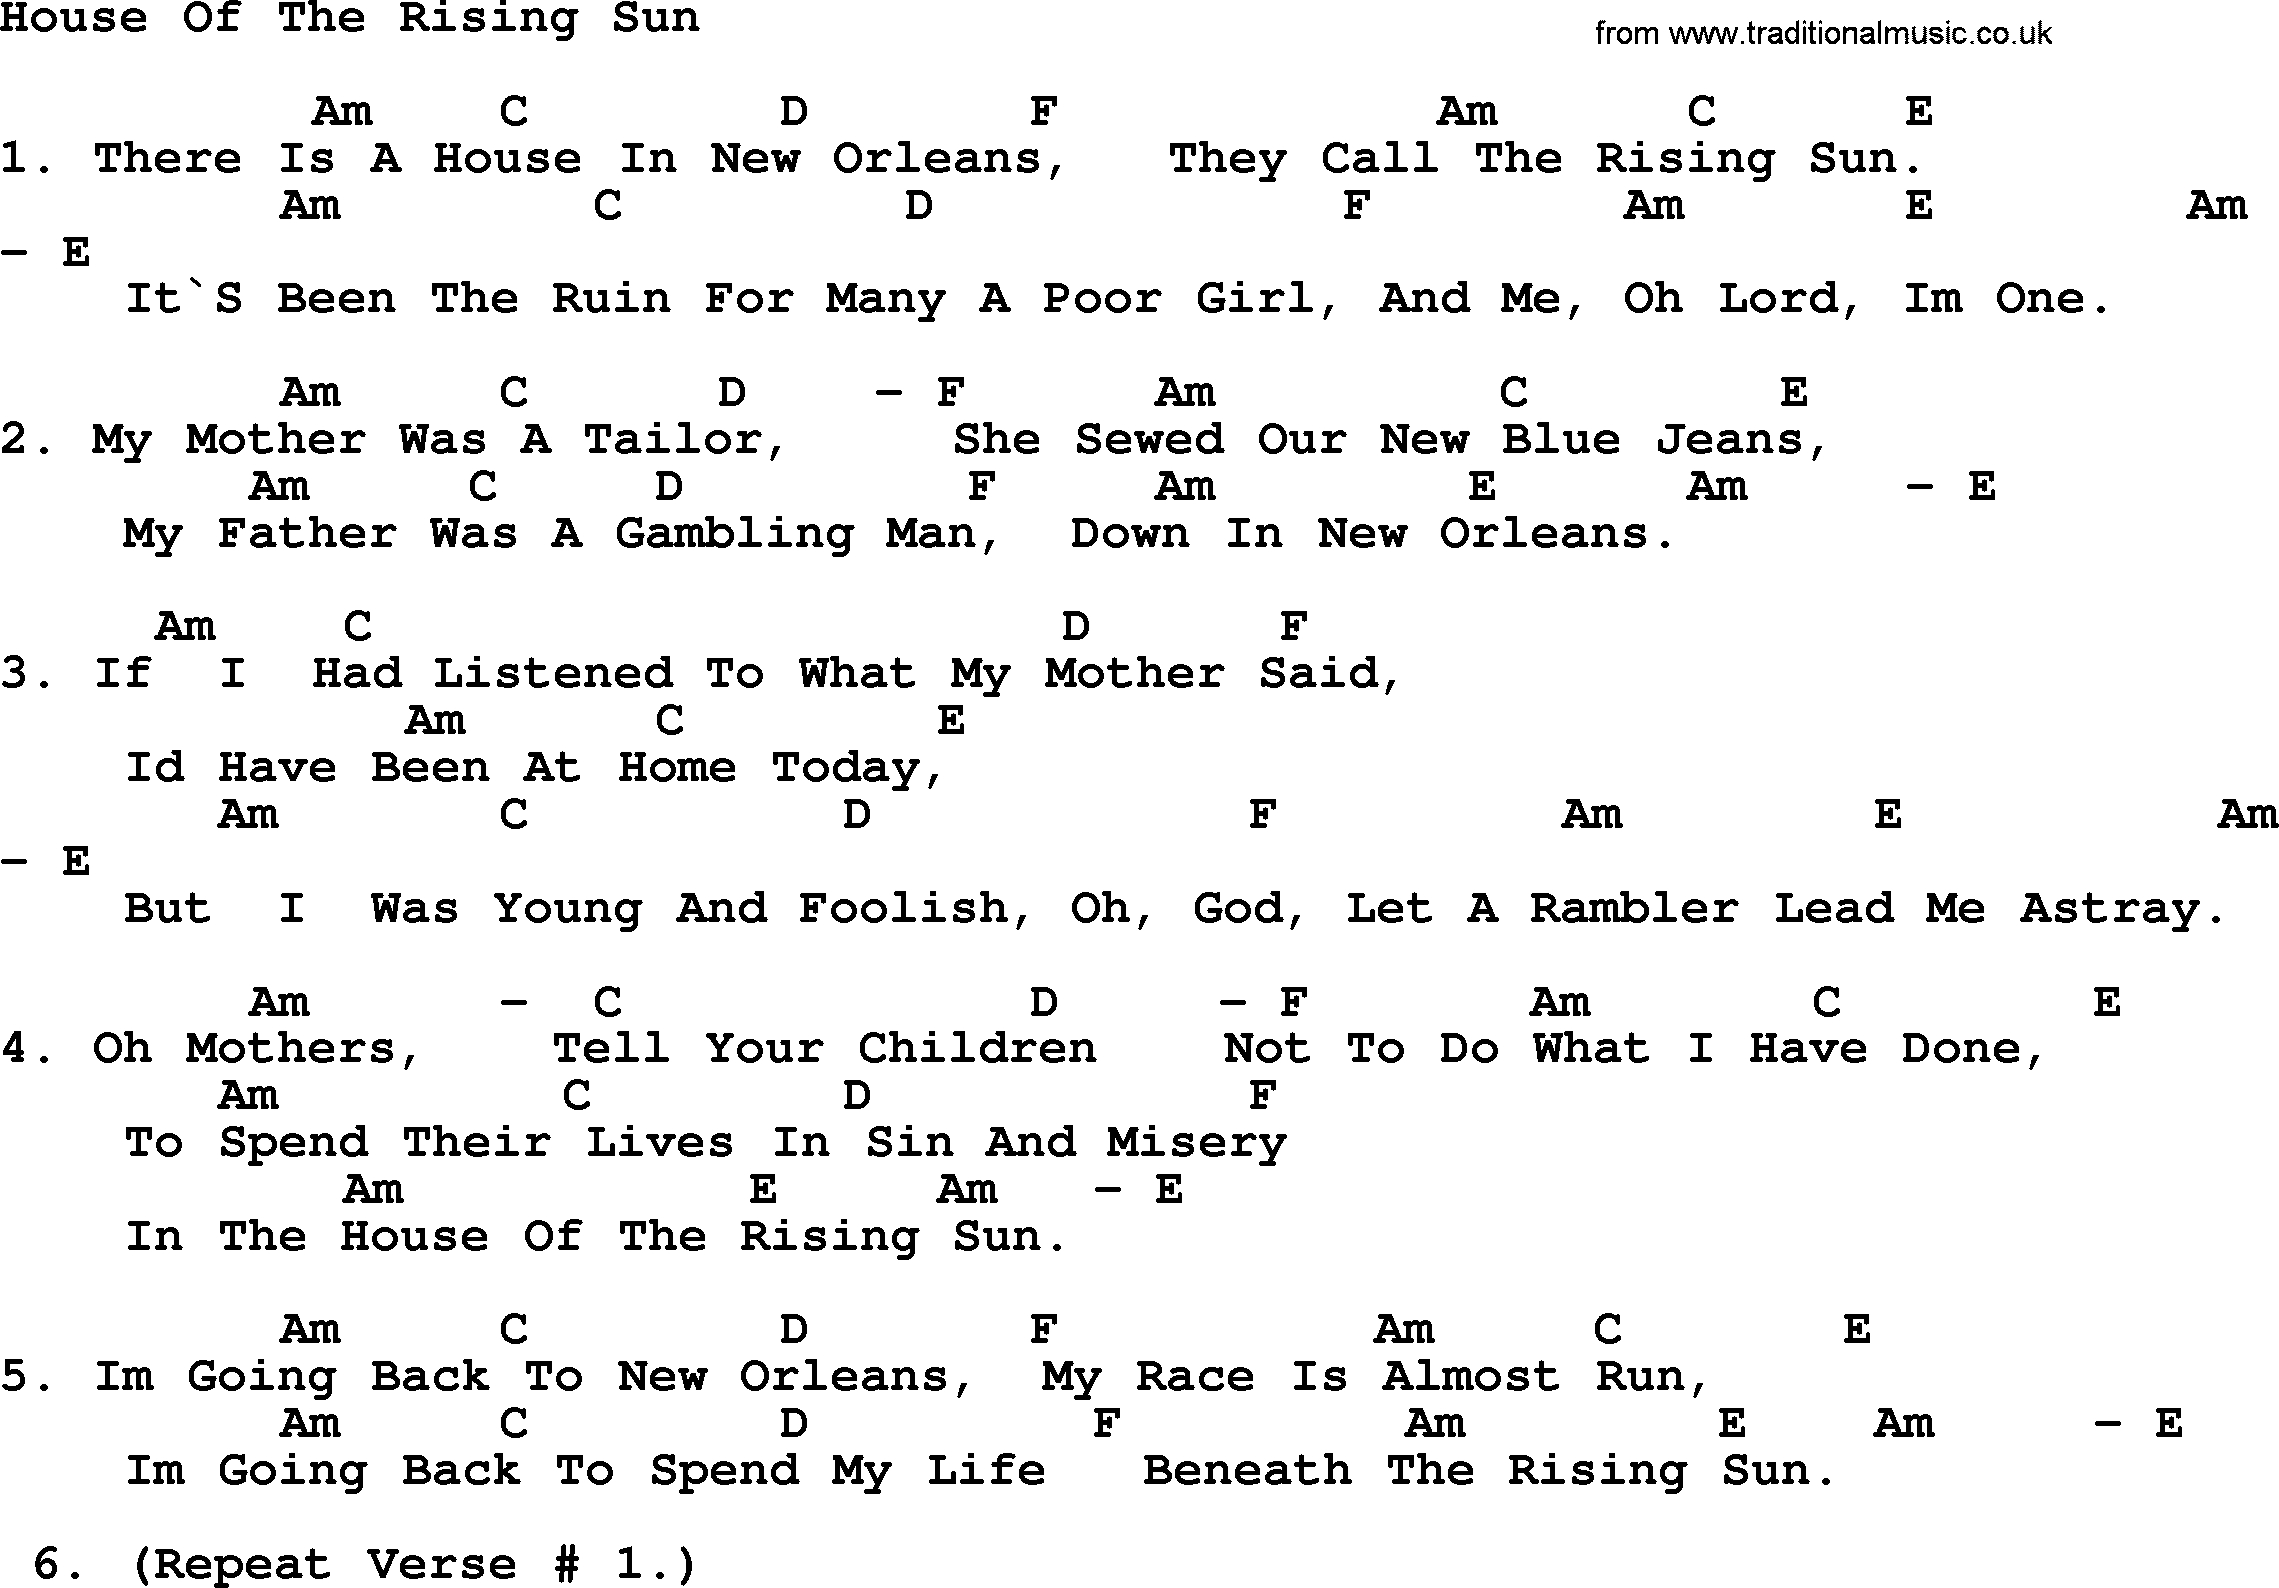 House Of The Rising Sun Chords Joan Baez Song House Of The Rising Sun Lyrics And Chords